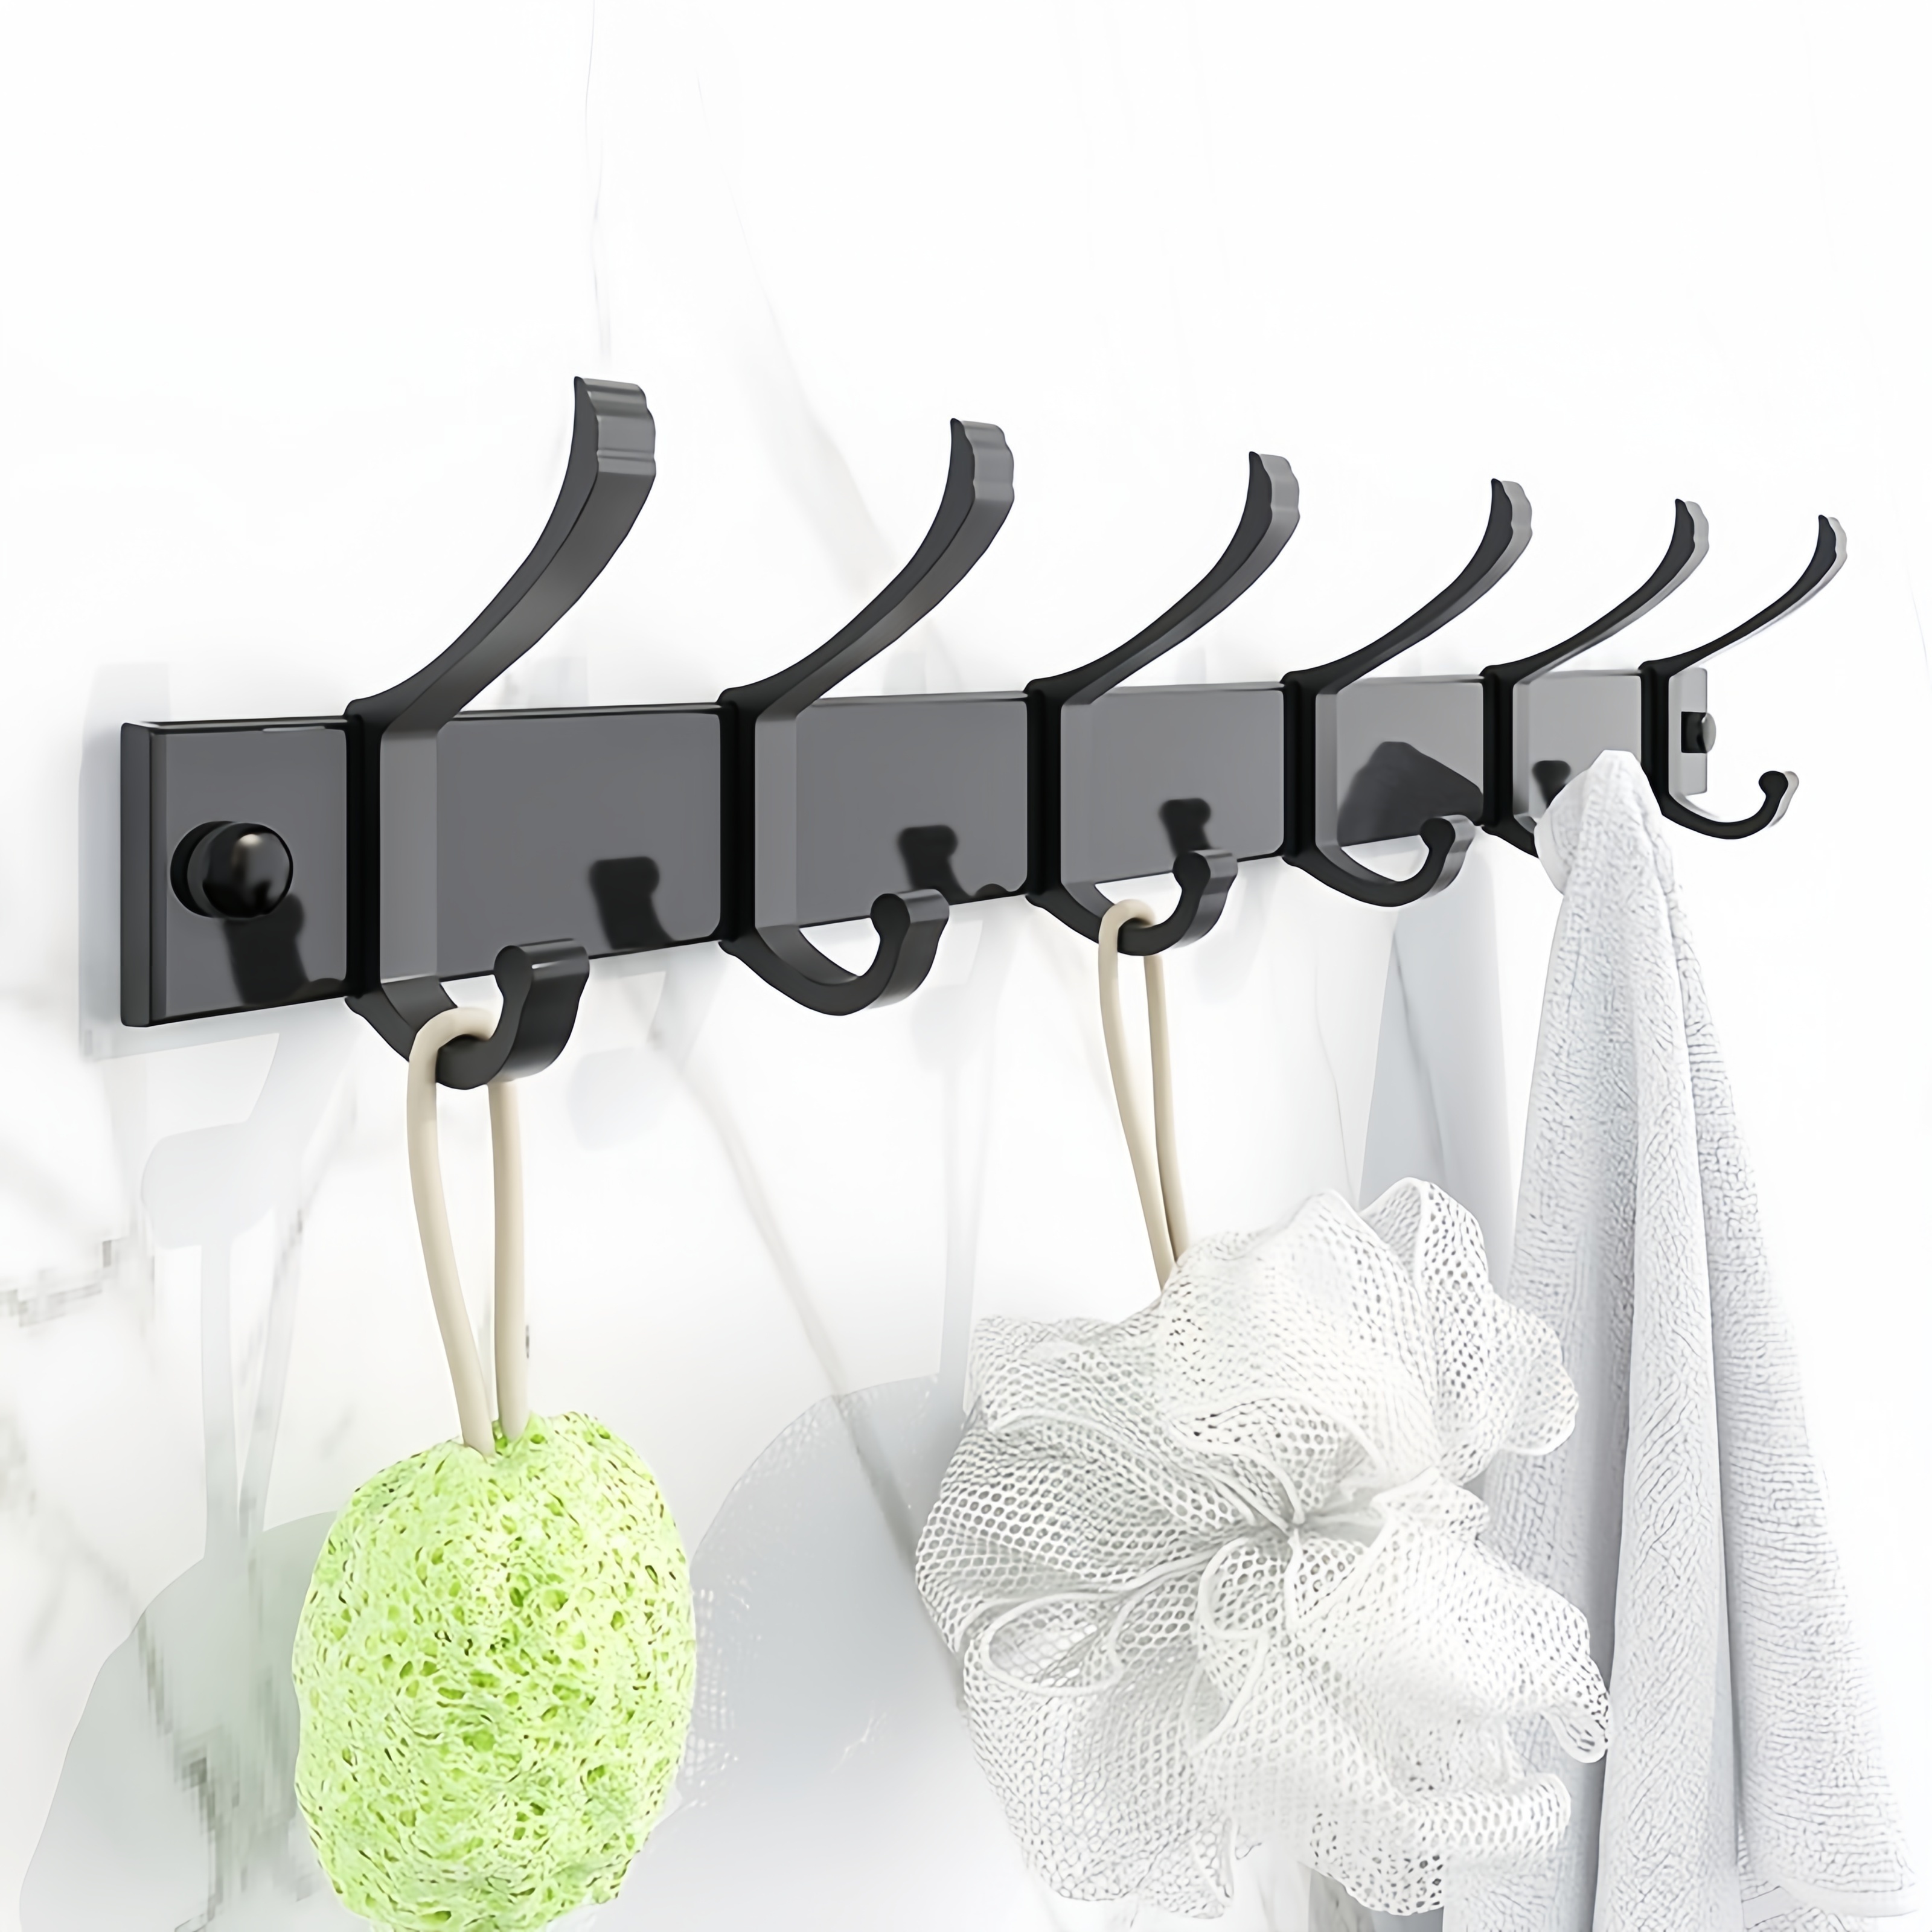 MroMax Wall Hook, Curtain Wall Hook, Zinc Alloy Wall Mounted Coat Hooks for  Hanging Bathroom Robe, Coat, Kitchen Utensil and Bag, Silver Brushed 1Pc